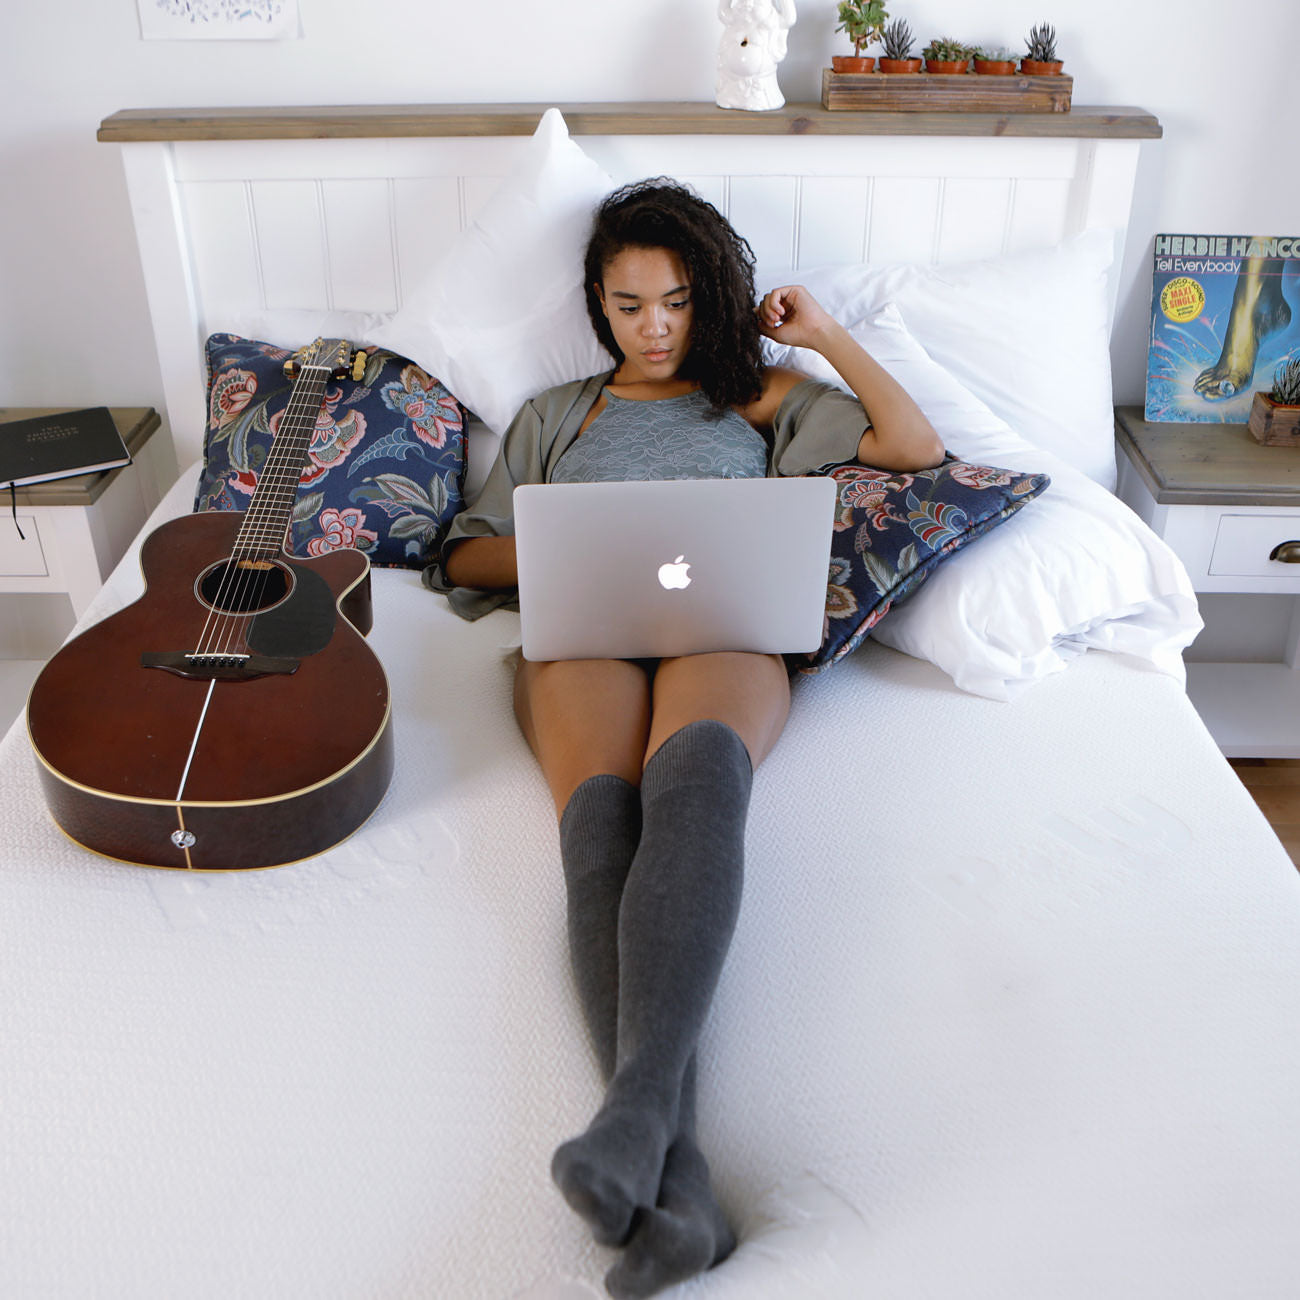 A satisfied customer is relaxing on the Polysleep foam mattress while using her laptop